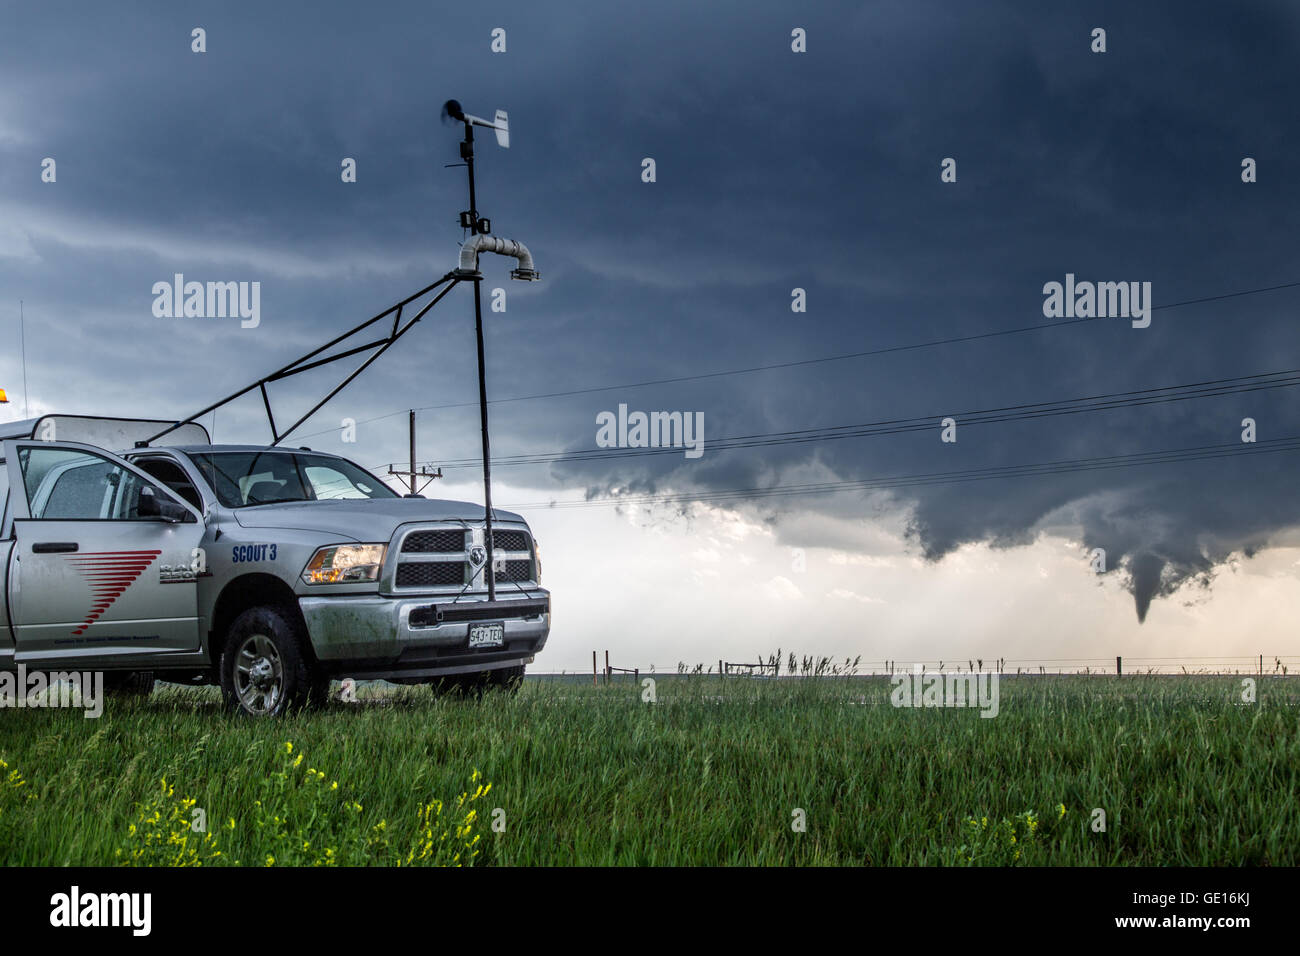 A storm chaser science research truck with CWSR parks near a developing tornado near Dodge City, Kansas, May 24, 2016. Stock Photo